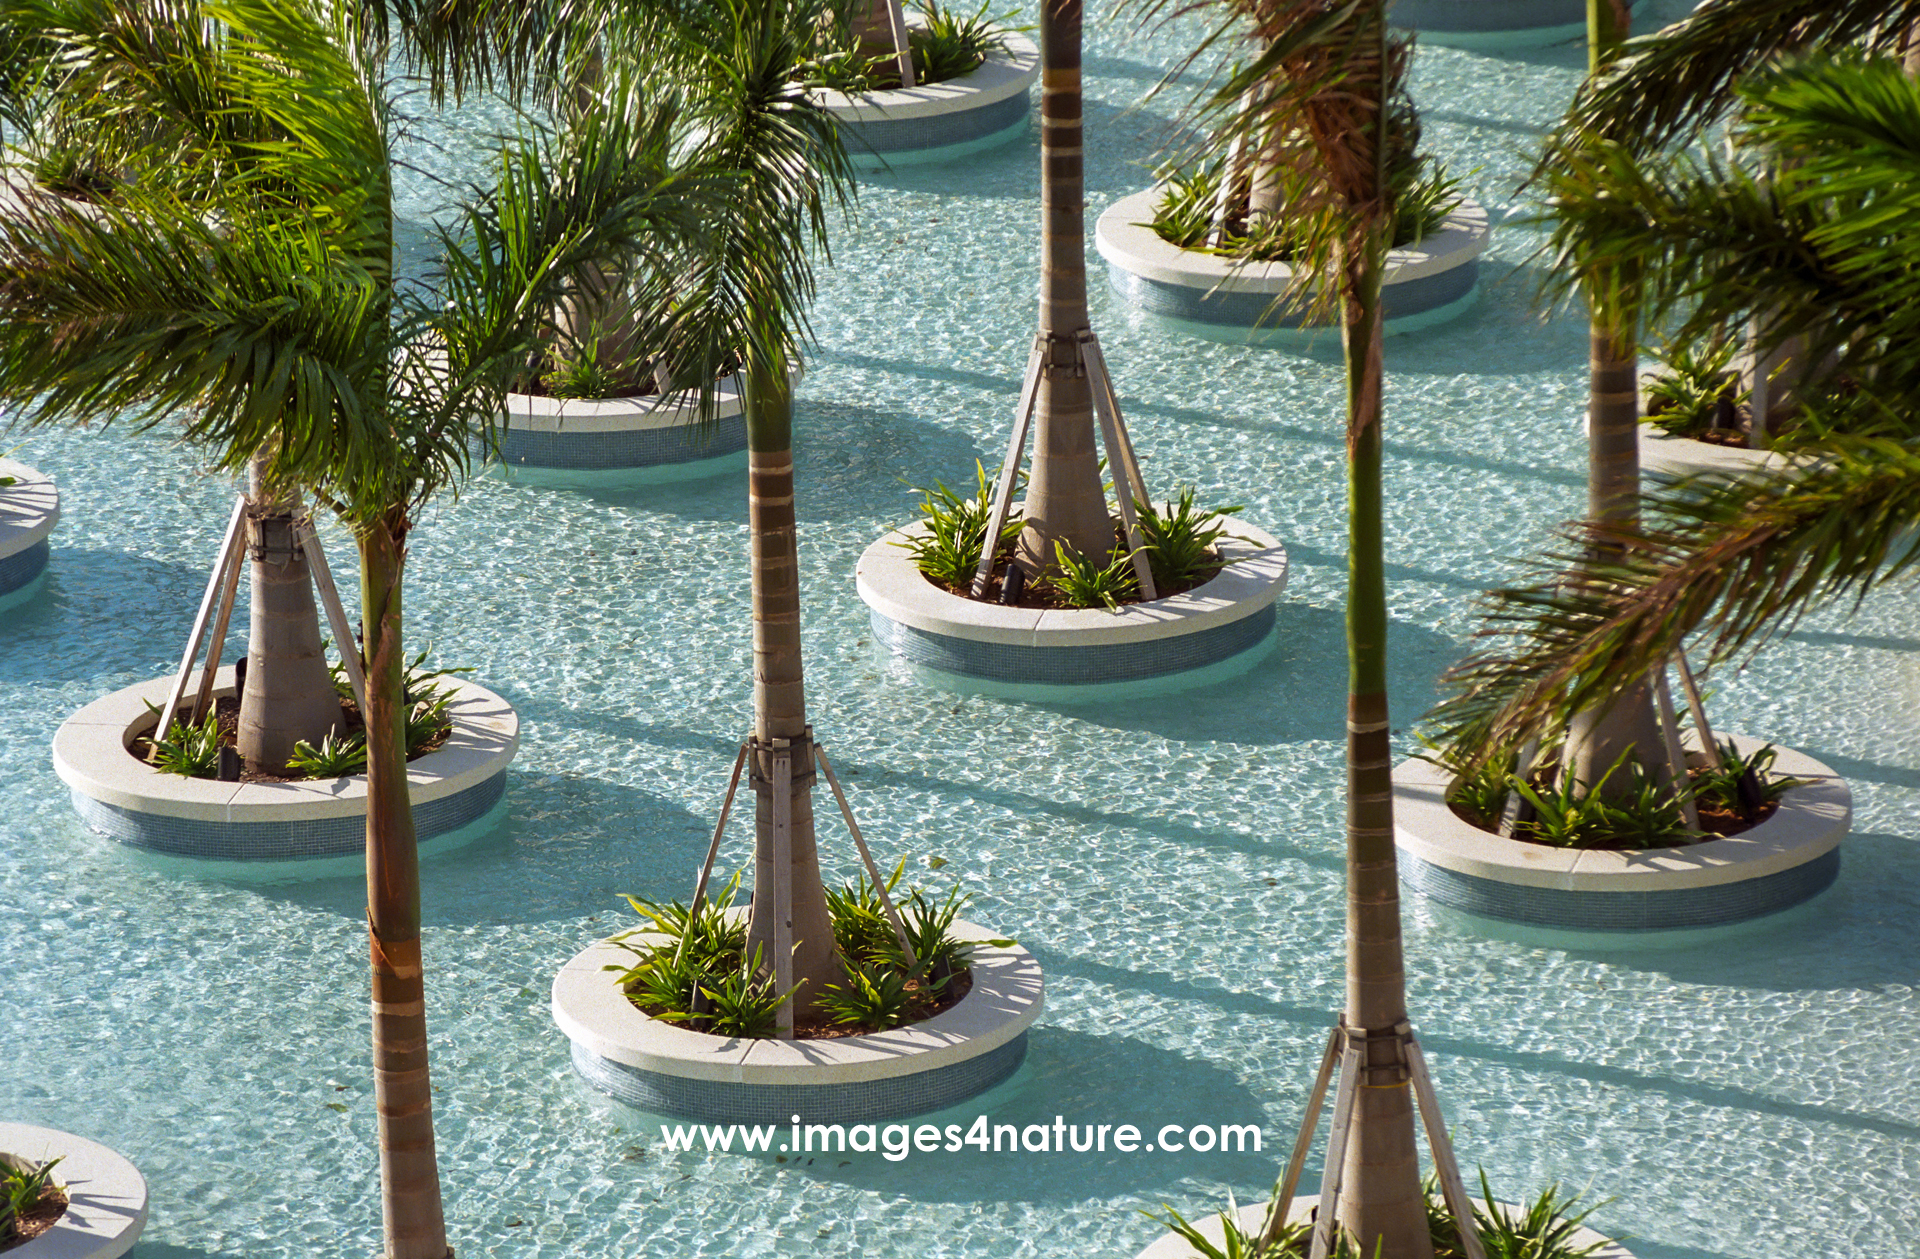 A shallow pool with many palm trees